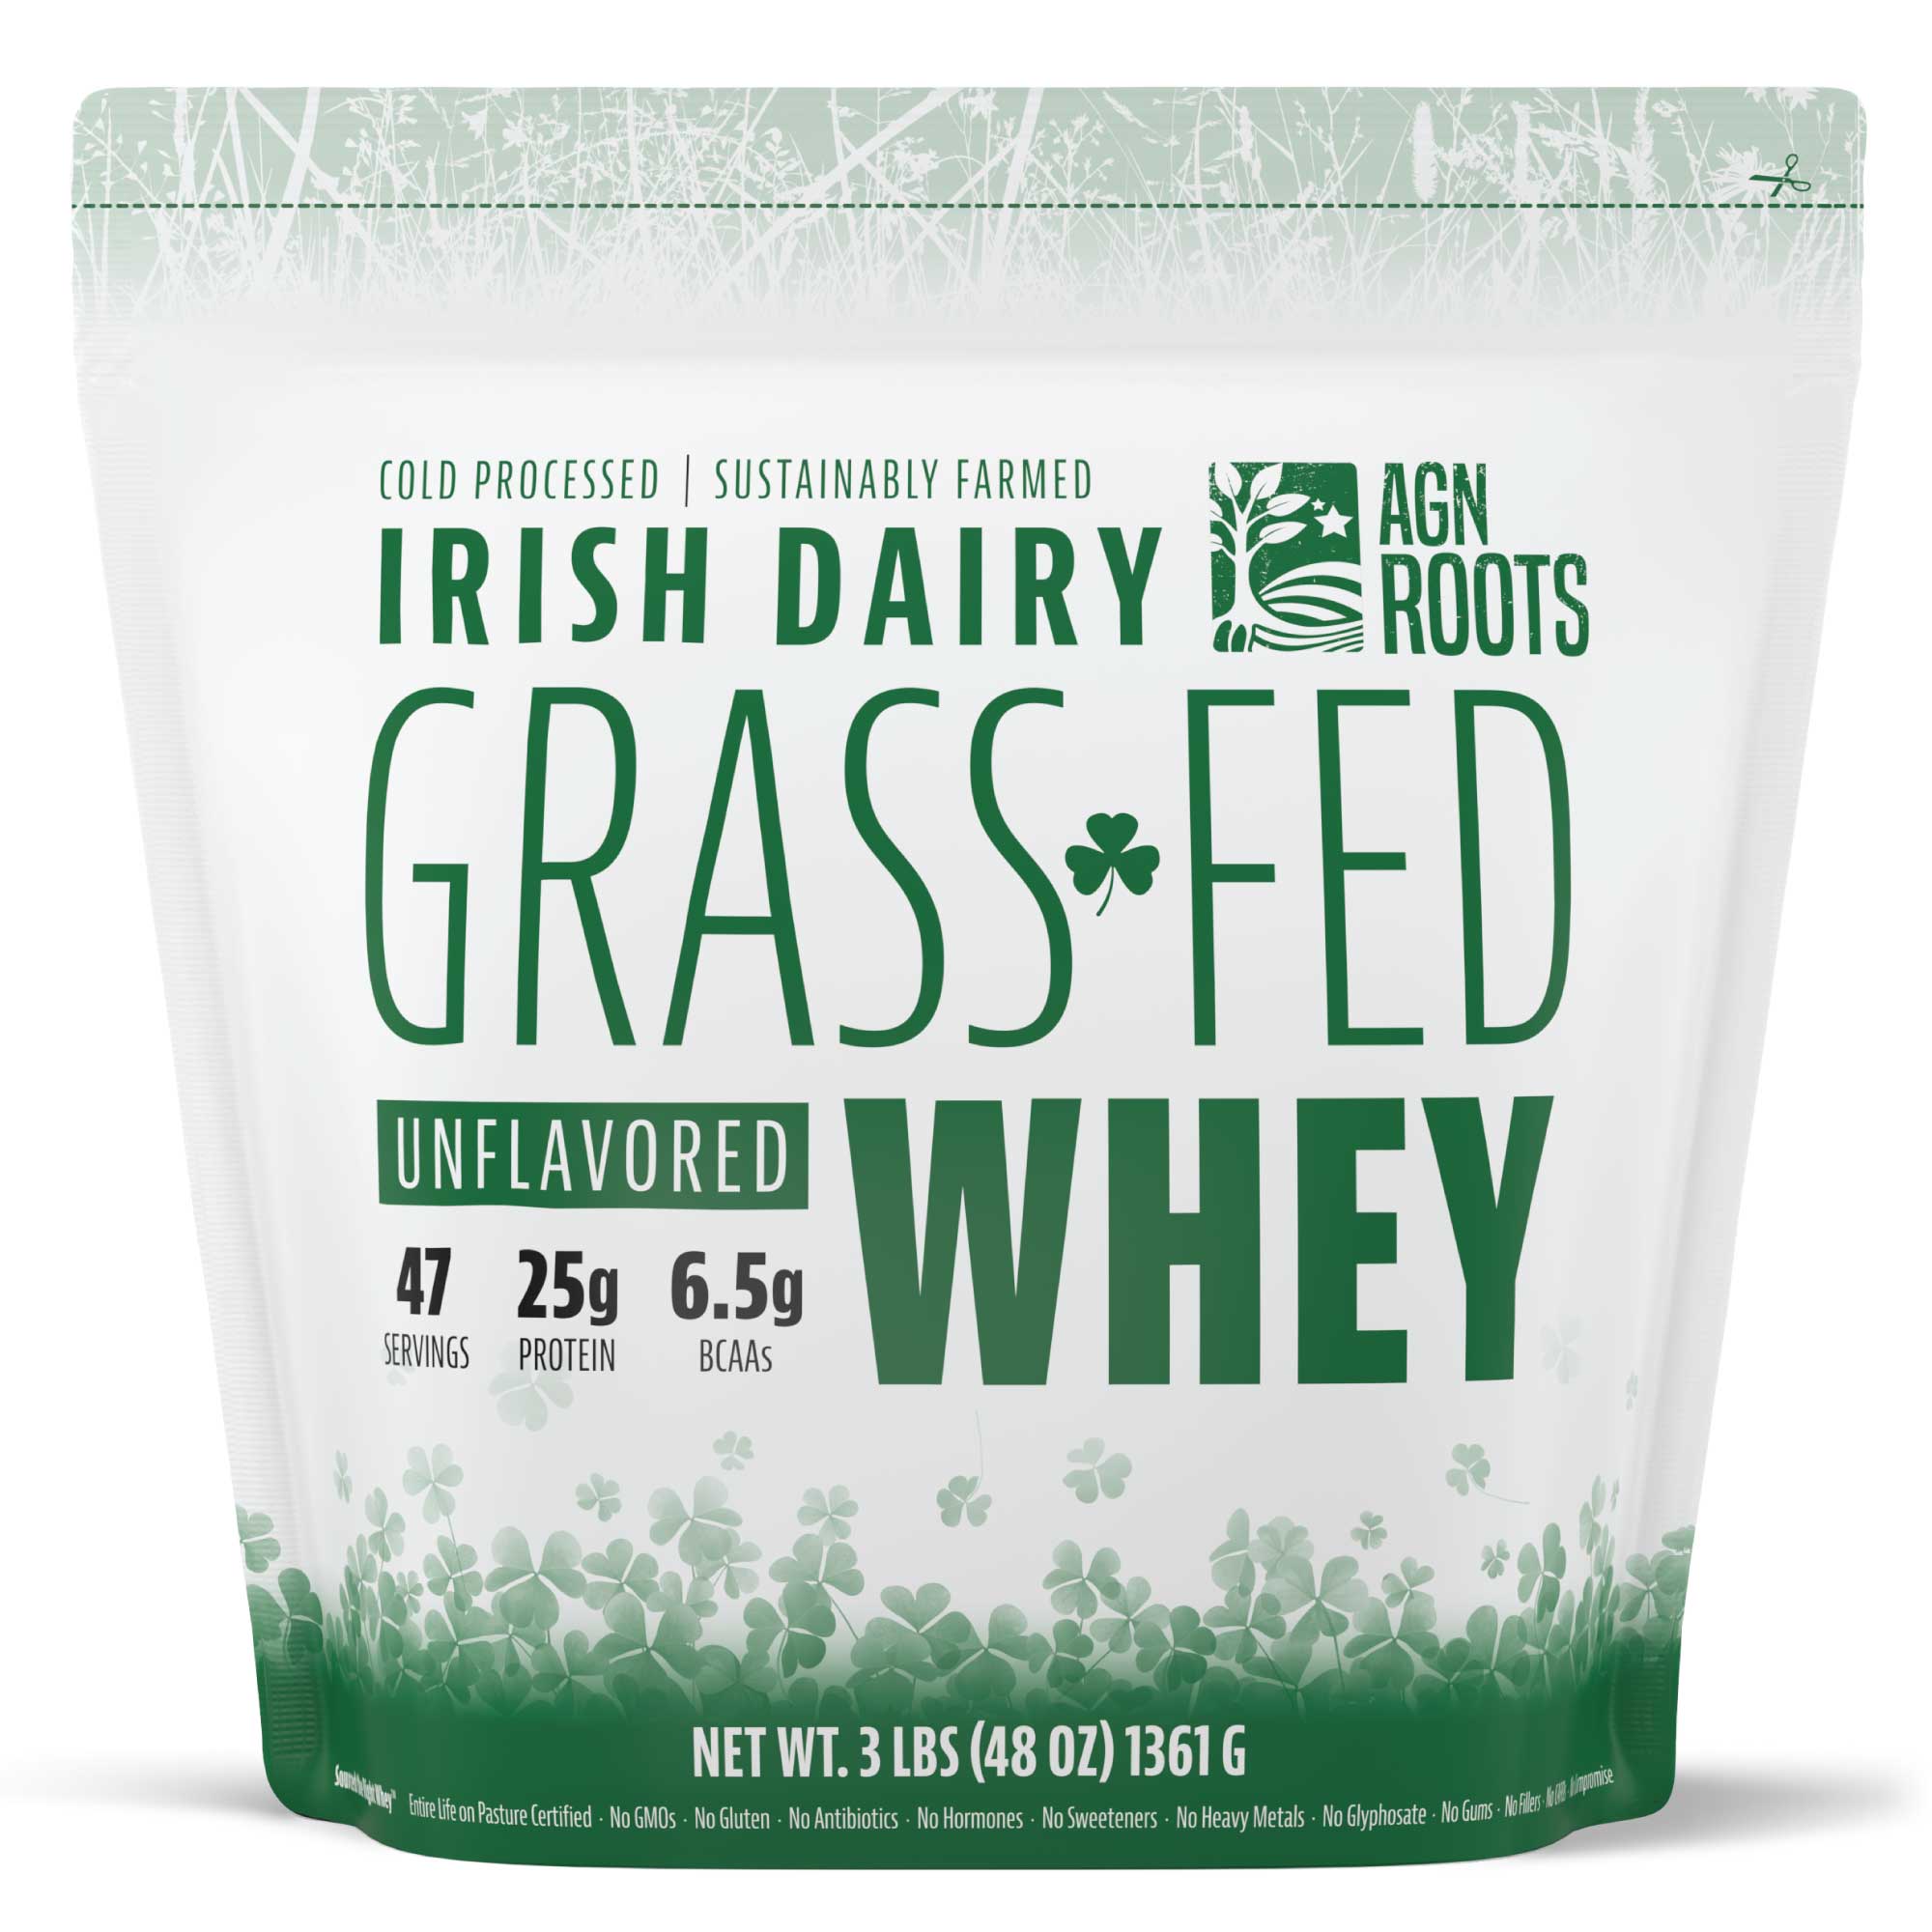 AGN Roots Grassfed Whey (3 lbs)